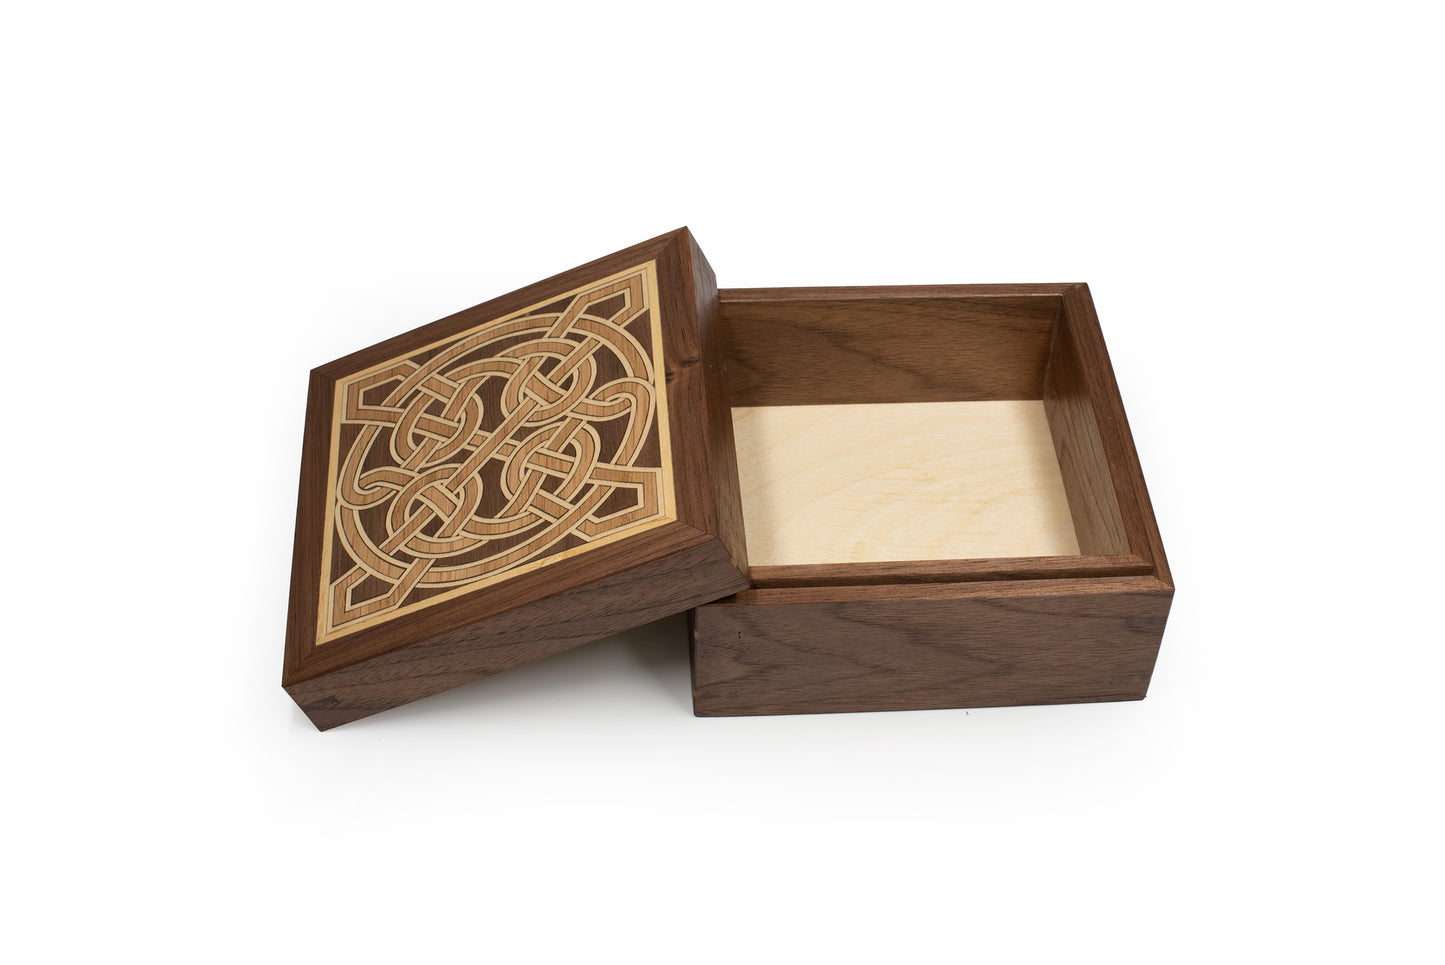 Keepsake Box, Handcrafted of Solid Walnut with Celtic Lindesfarne Marquetry inlays, optional Personalised engraving